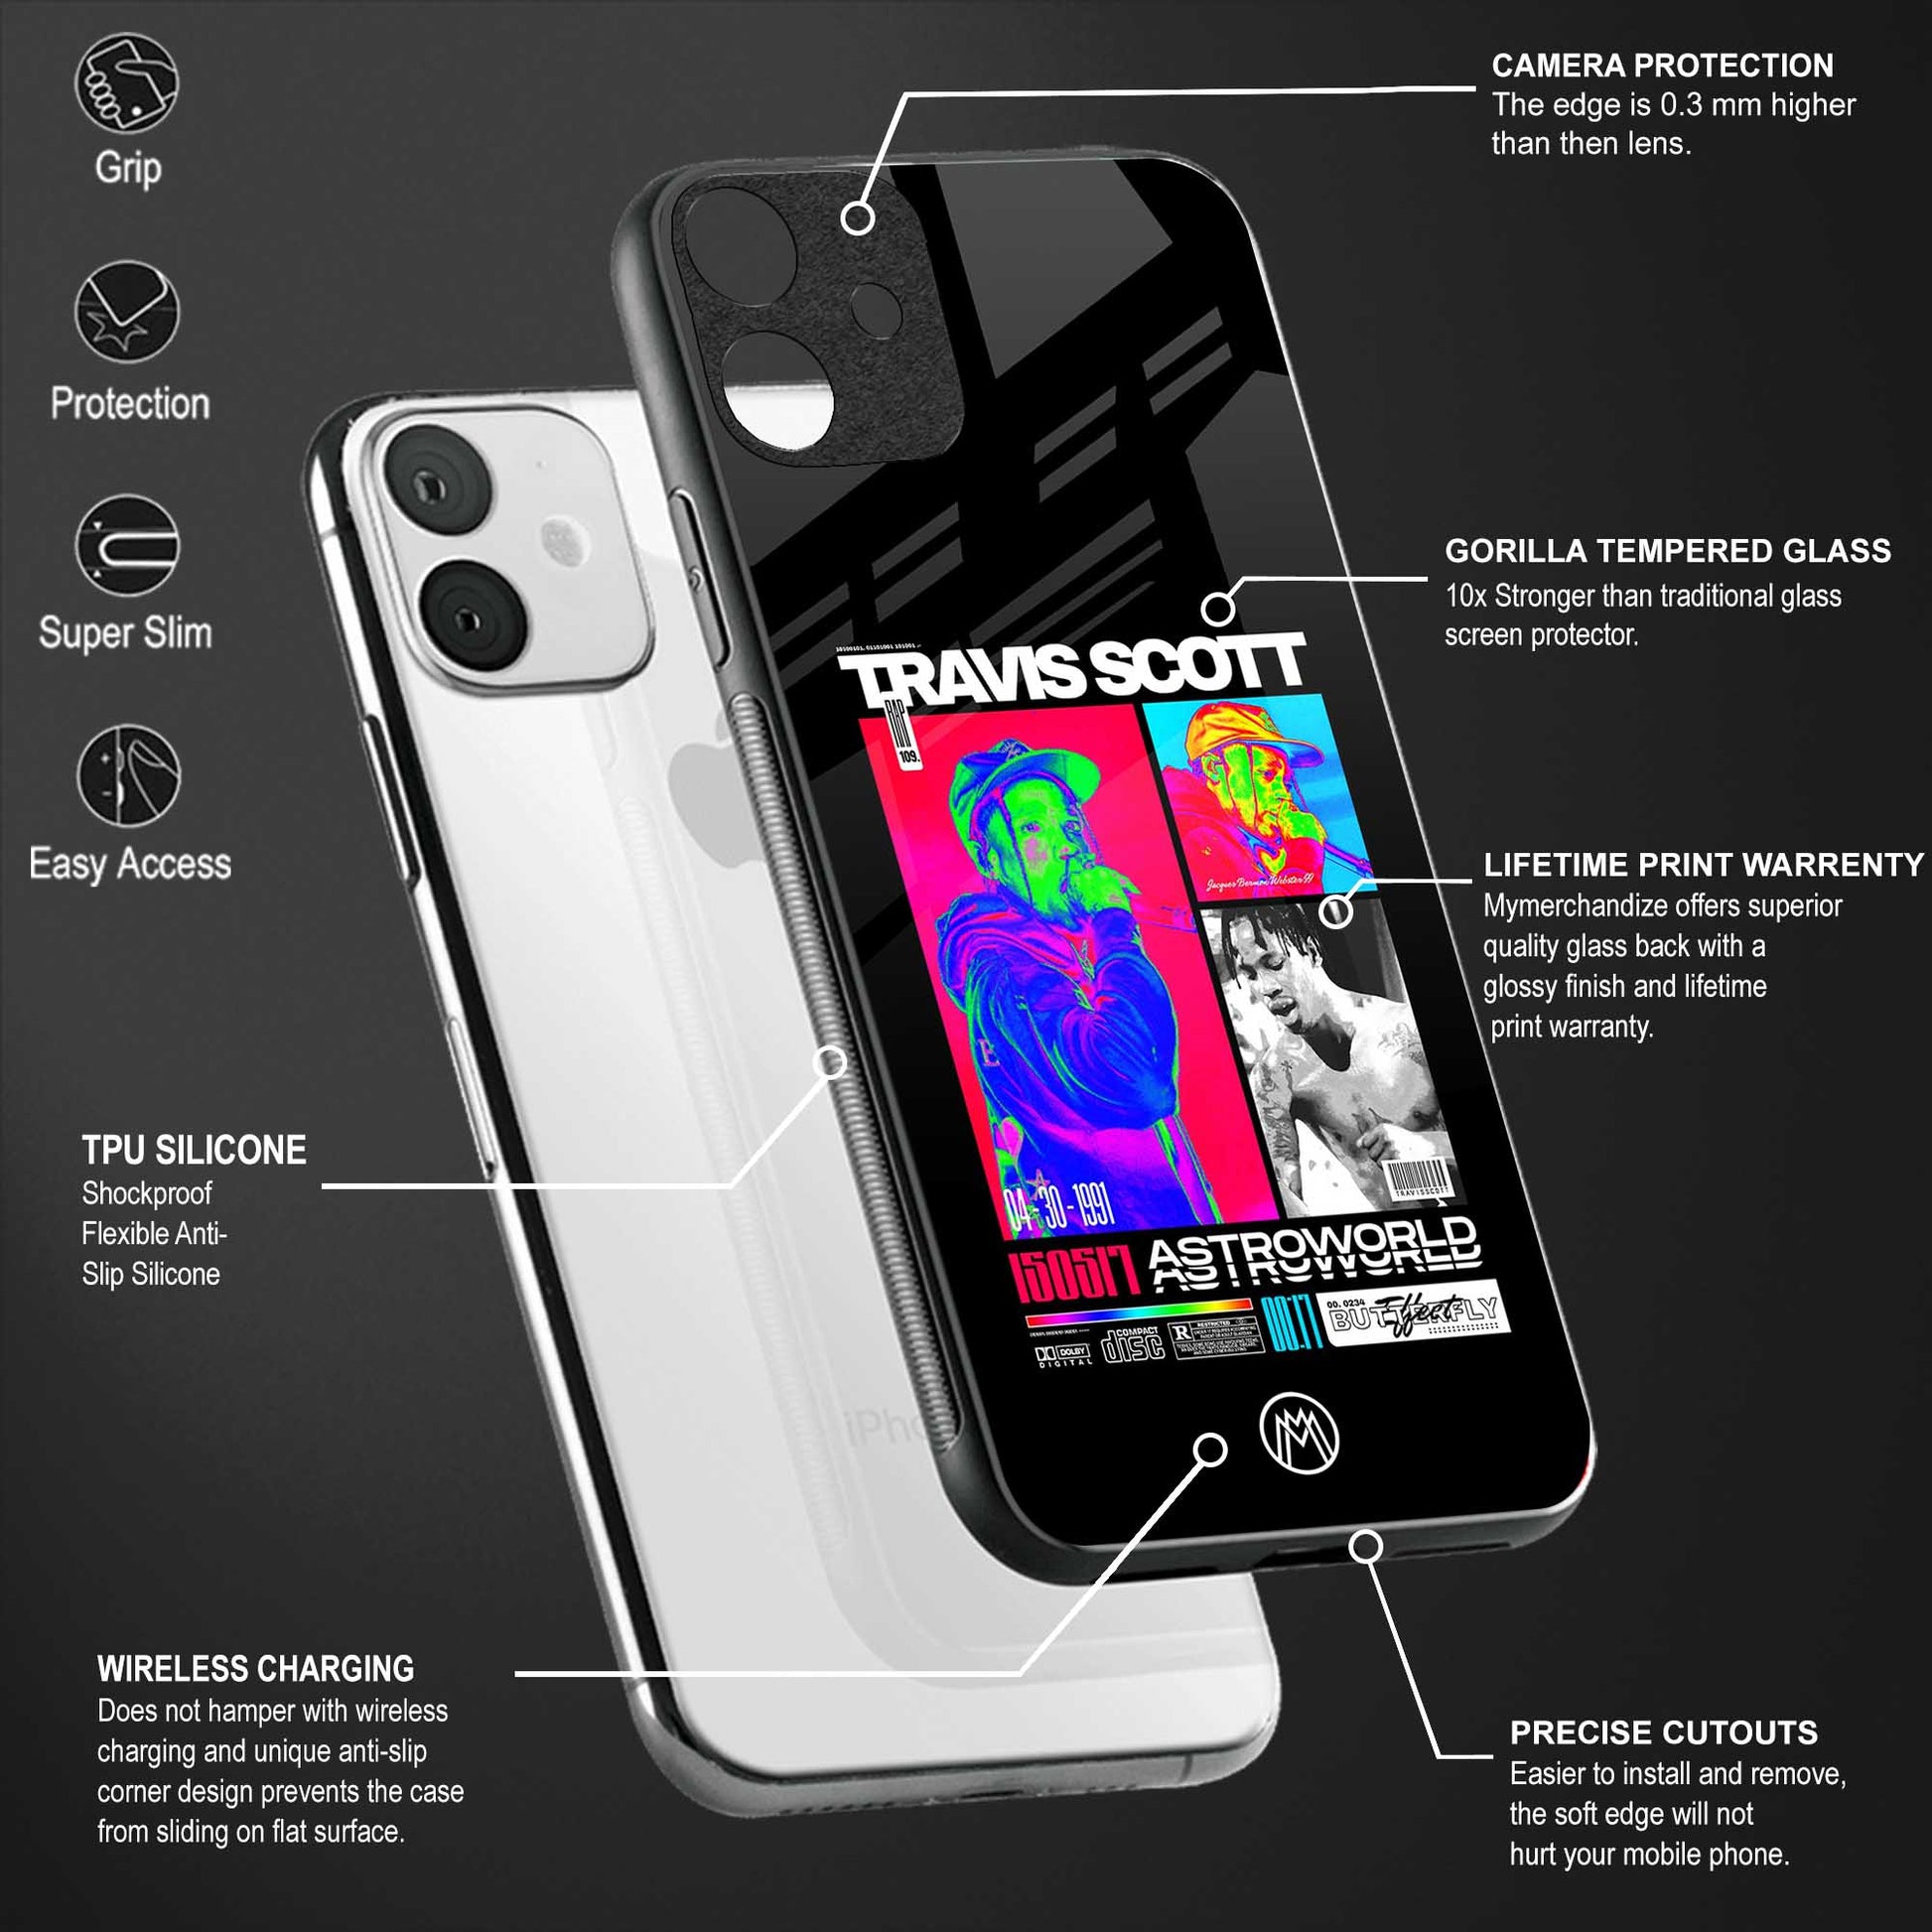 travis scott astroworld back phone cover | glass case for oneplus 11